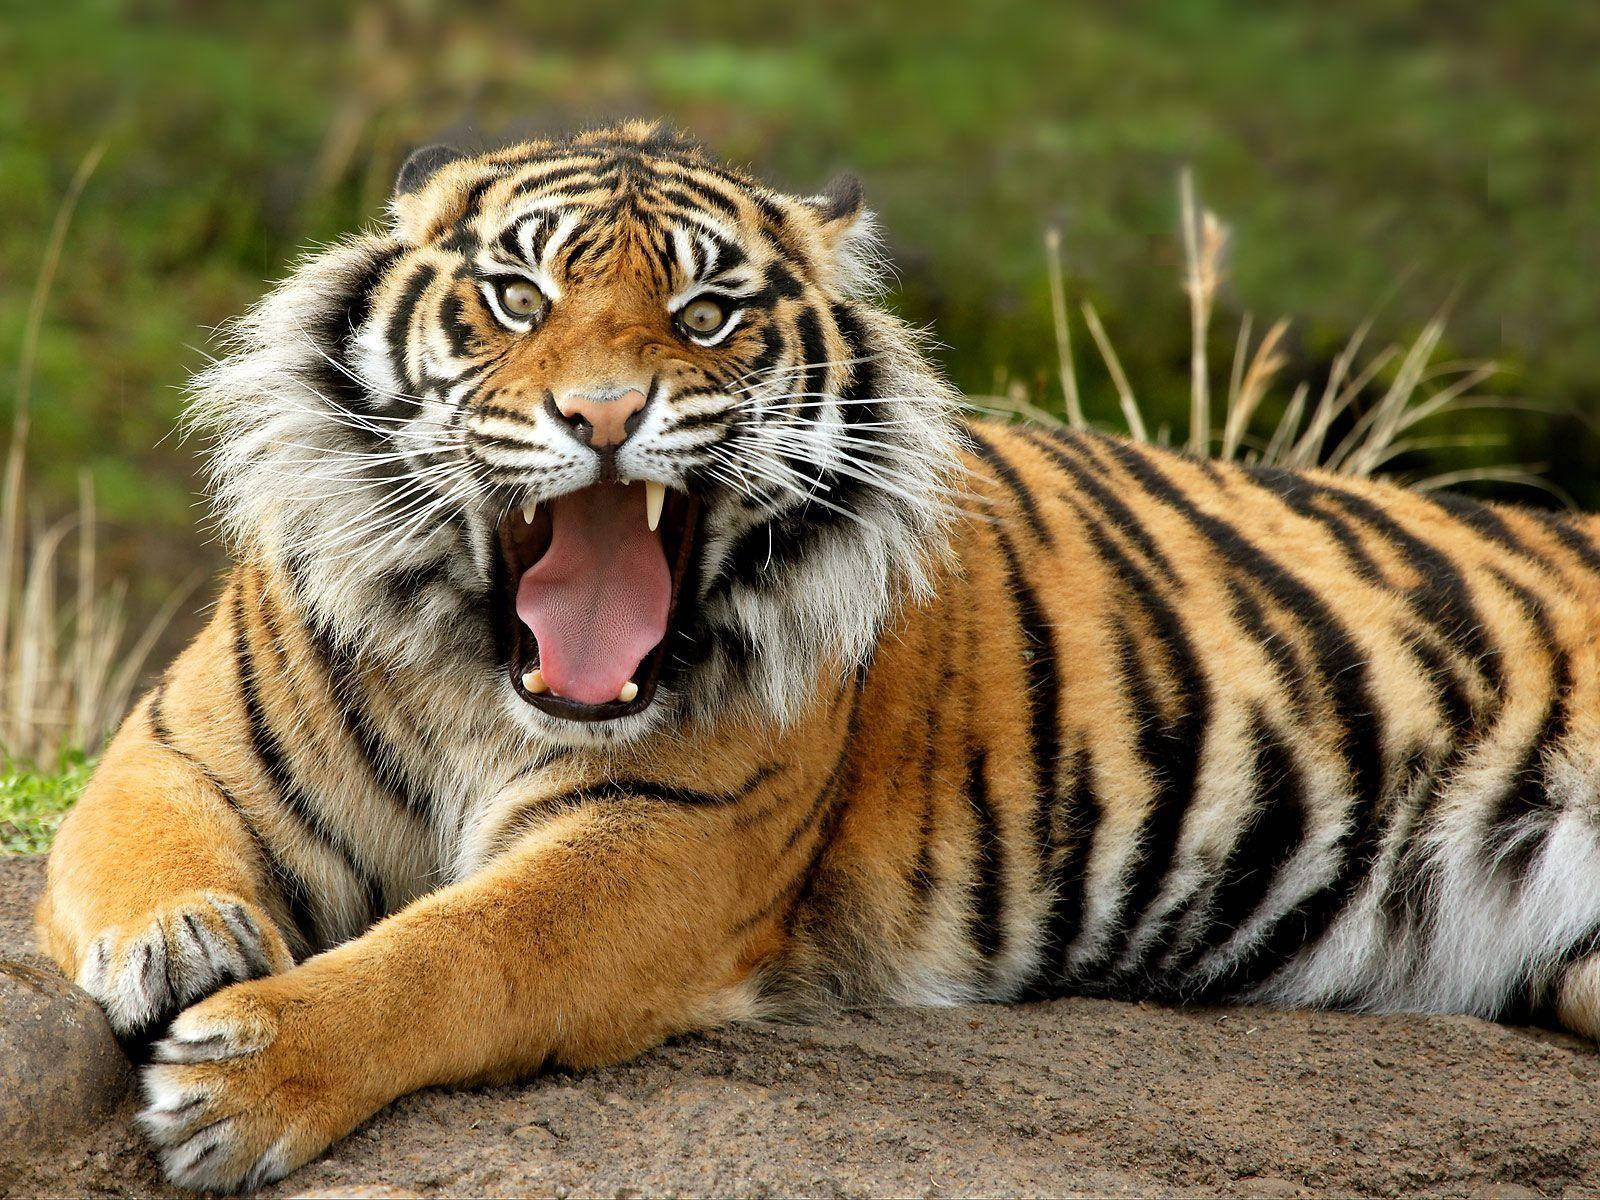 Large Angry Tiger Wallpaper